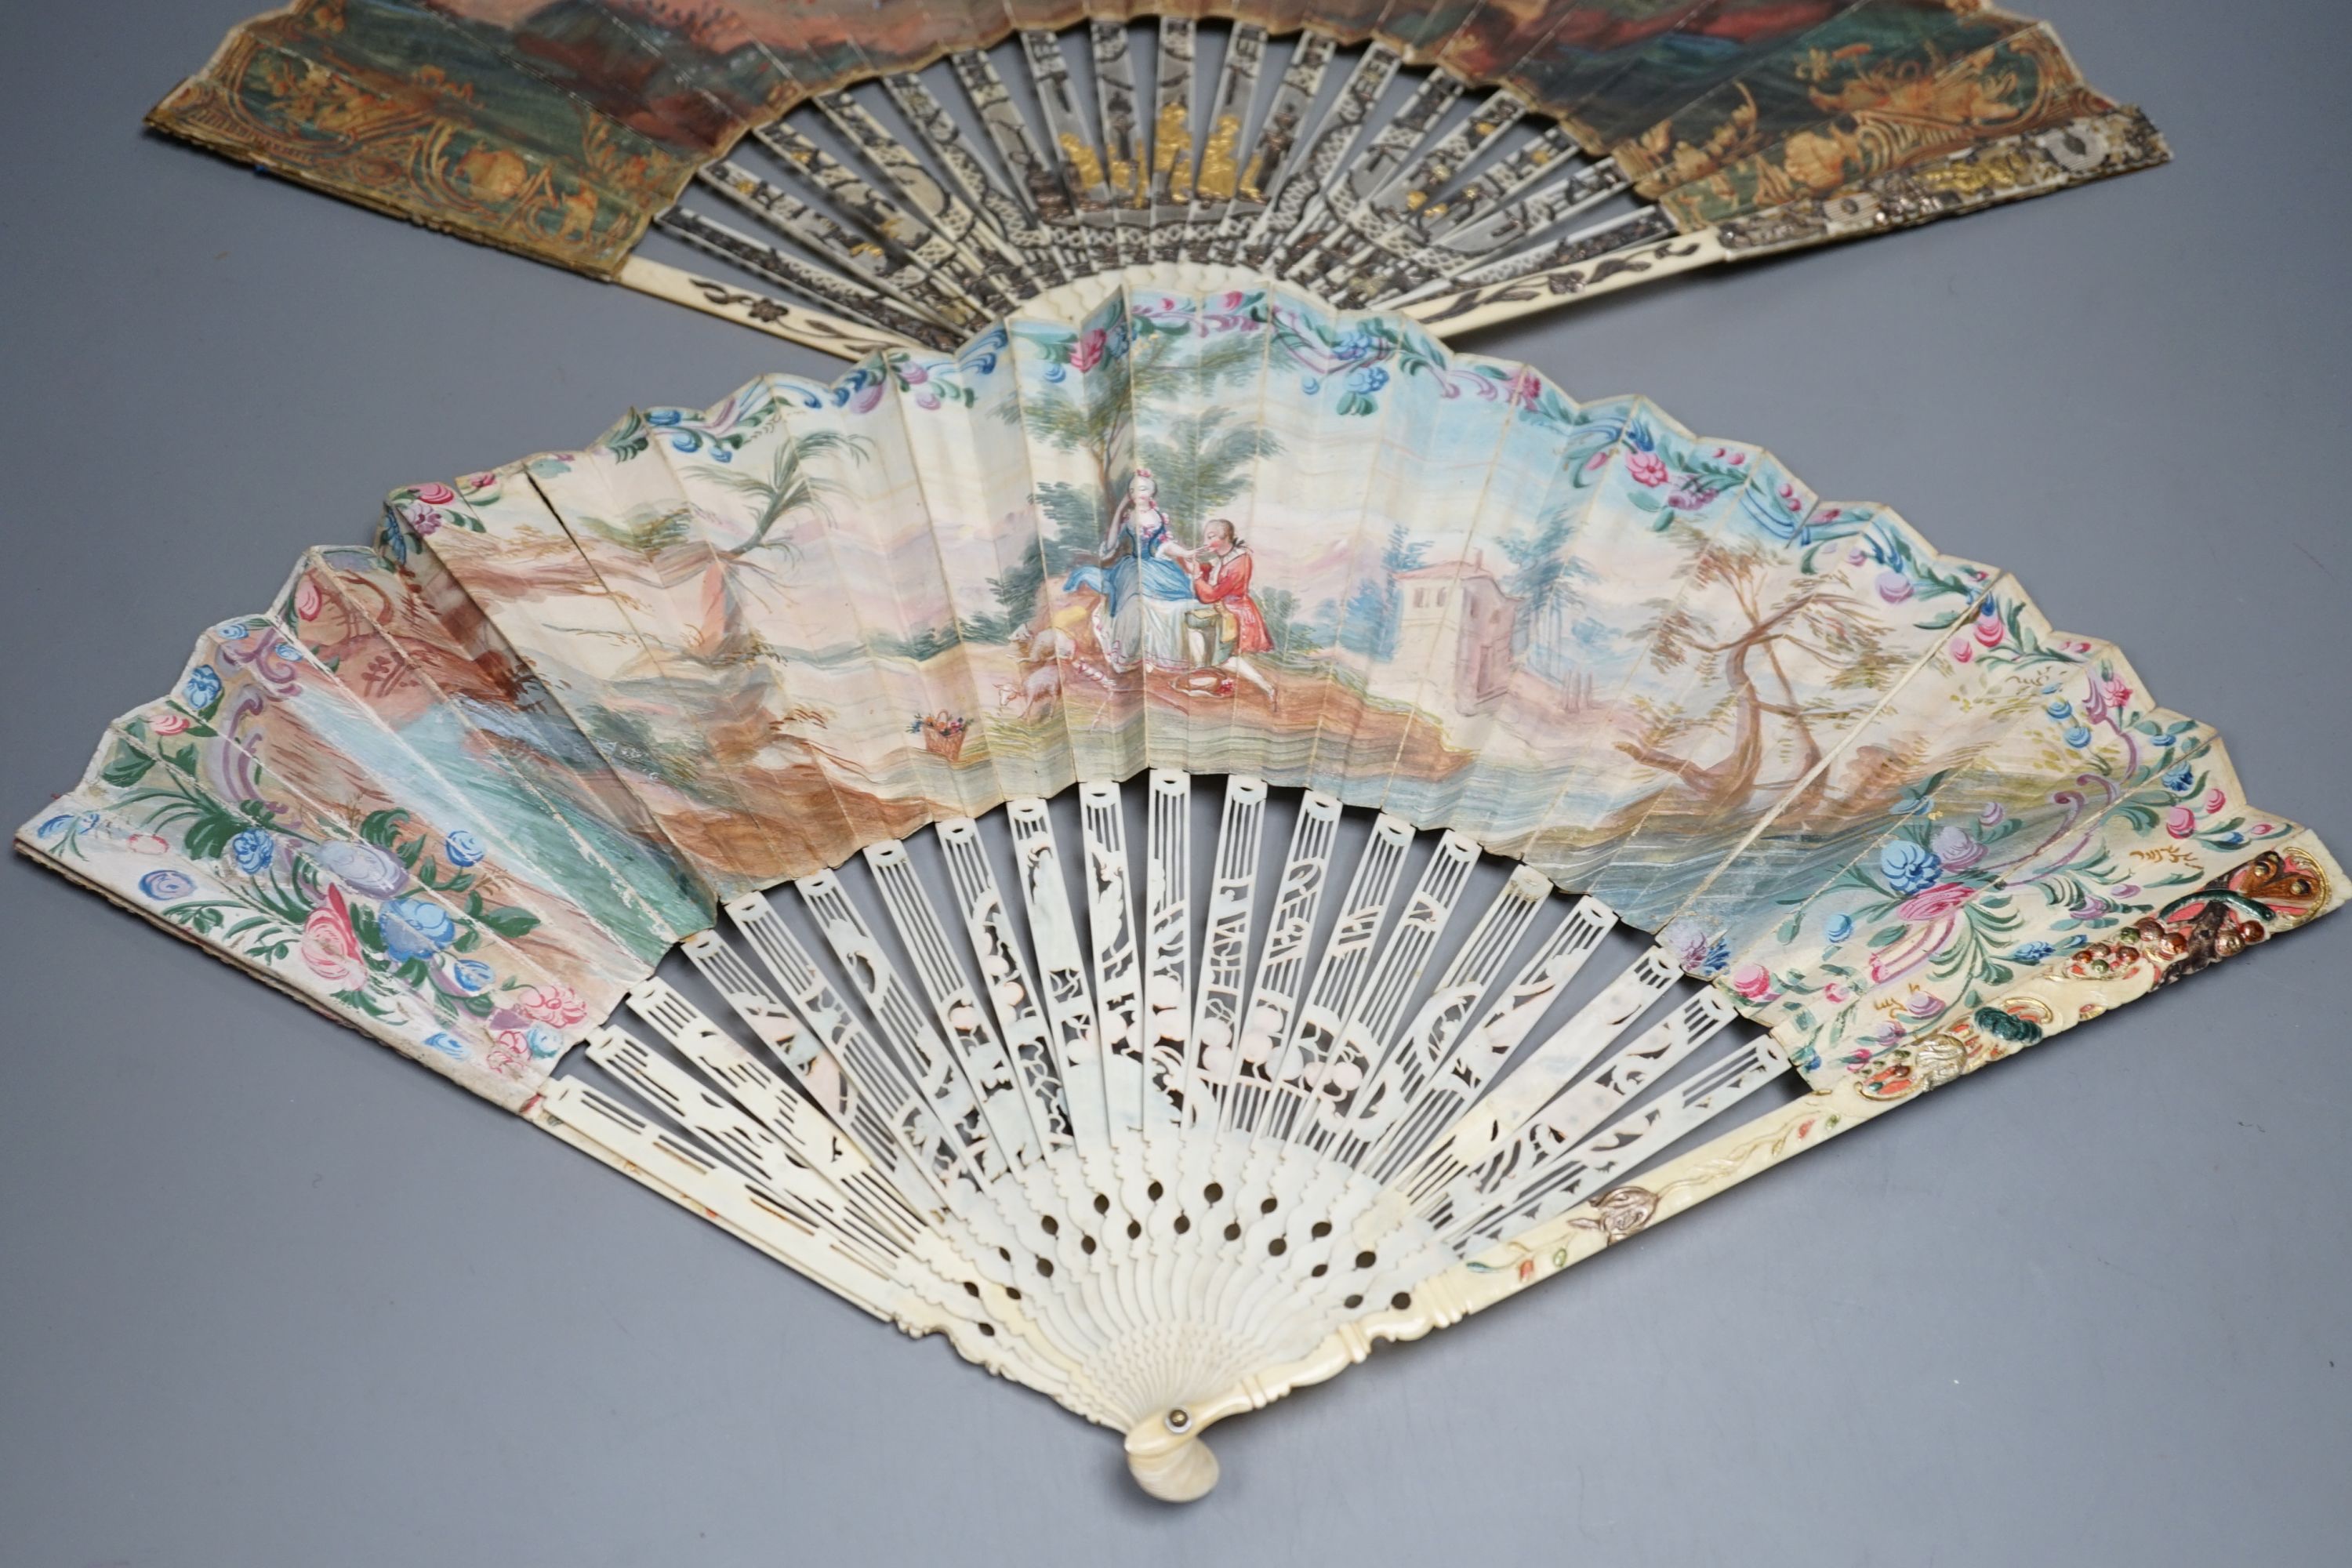 Two late 18th/early 19th century French gilded and silvered ivory and painted paper leaf fans - Image 8 of 9